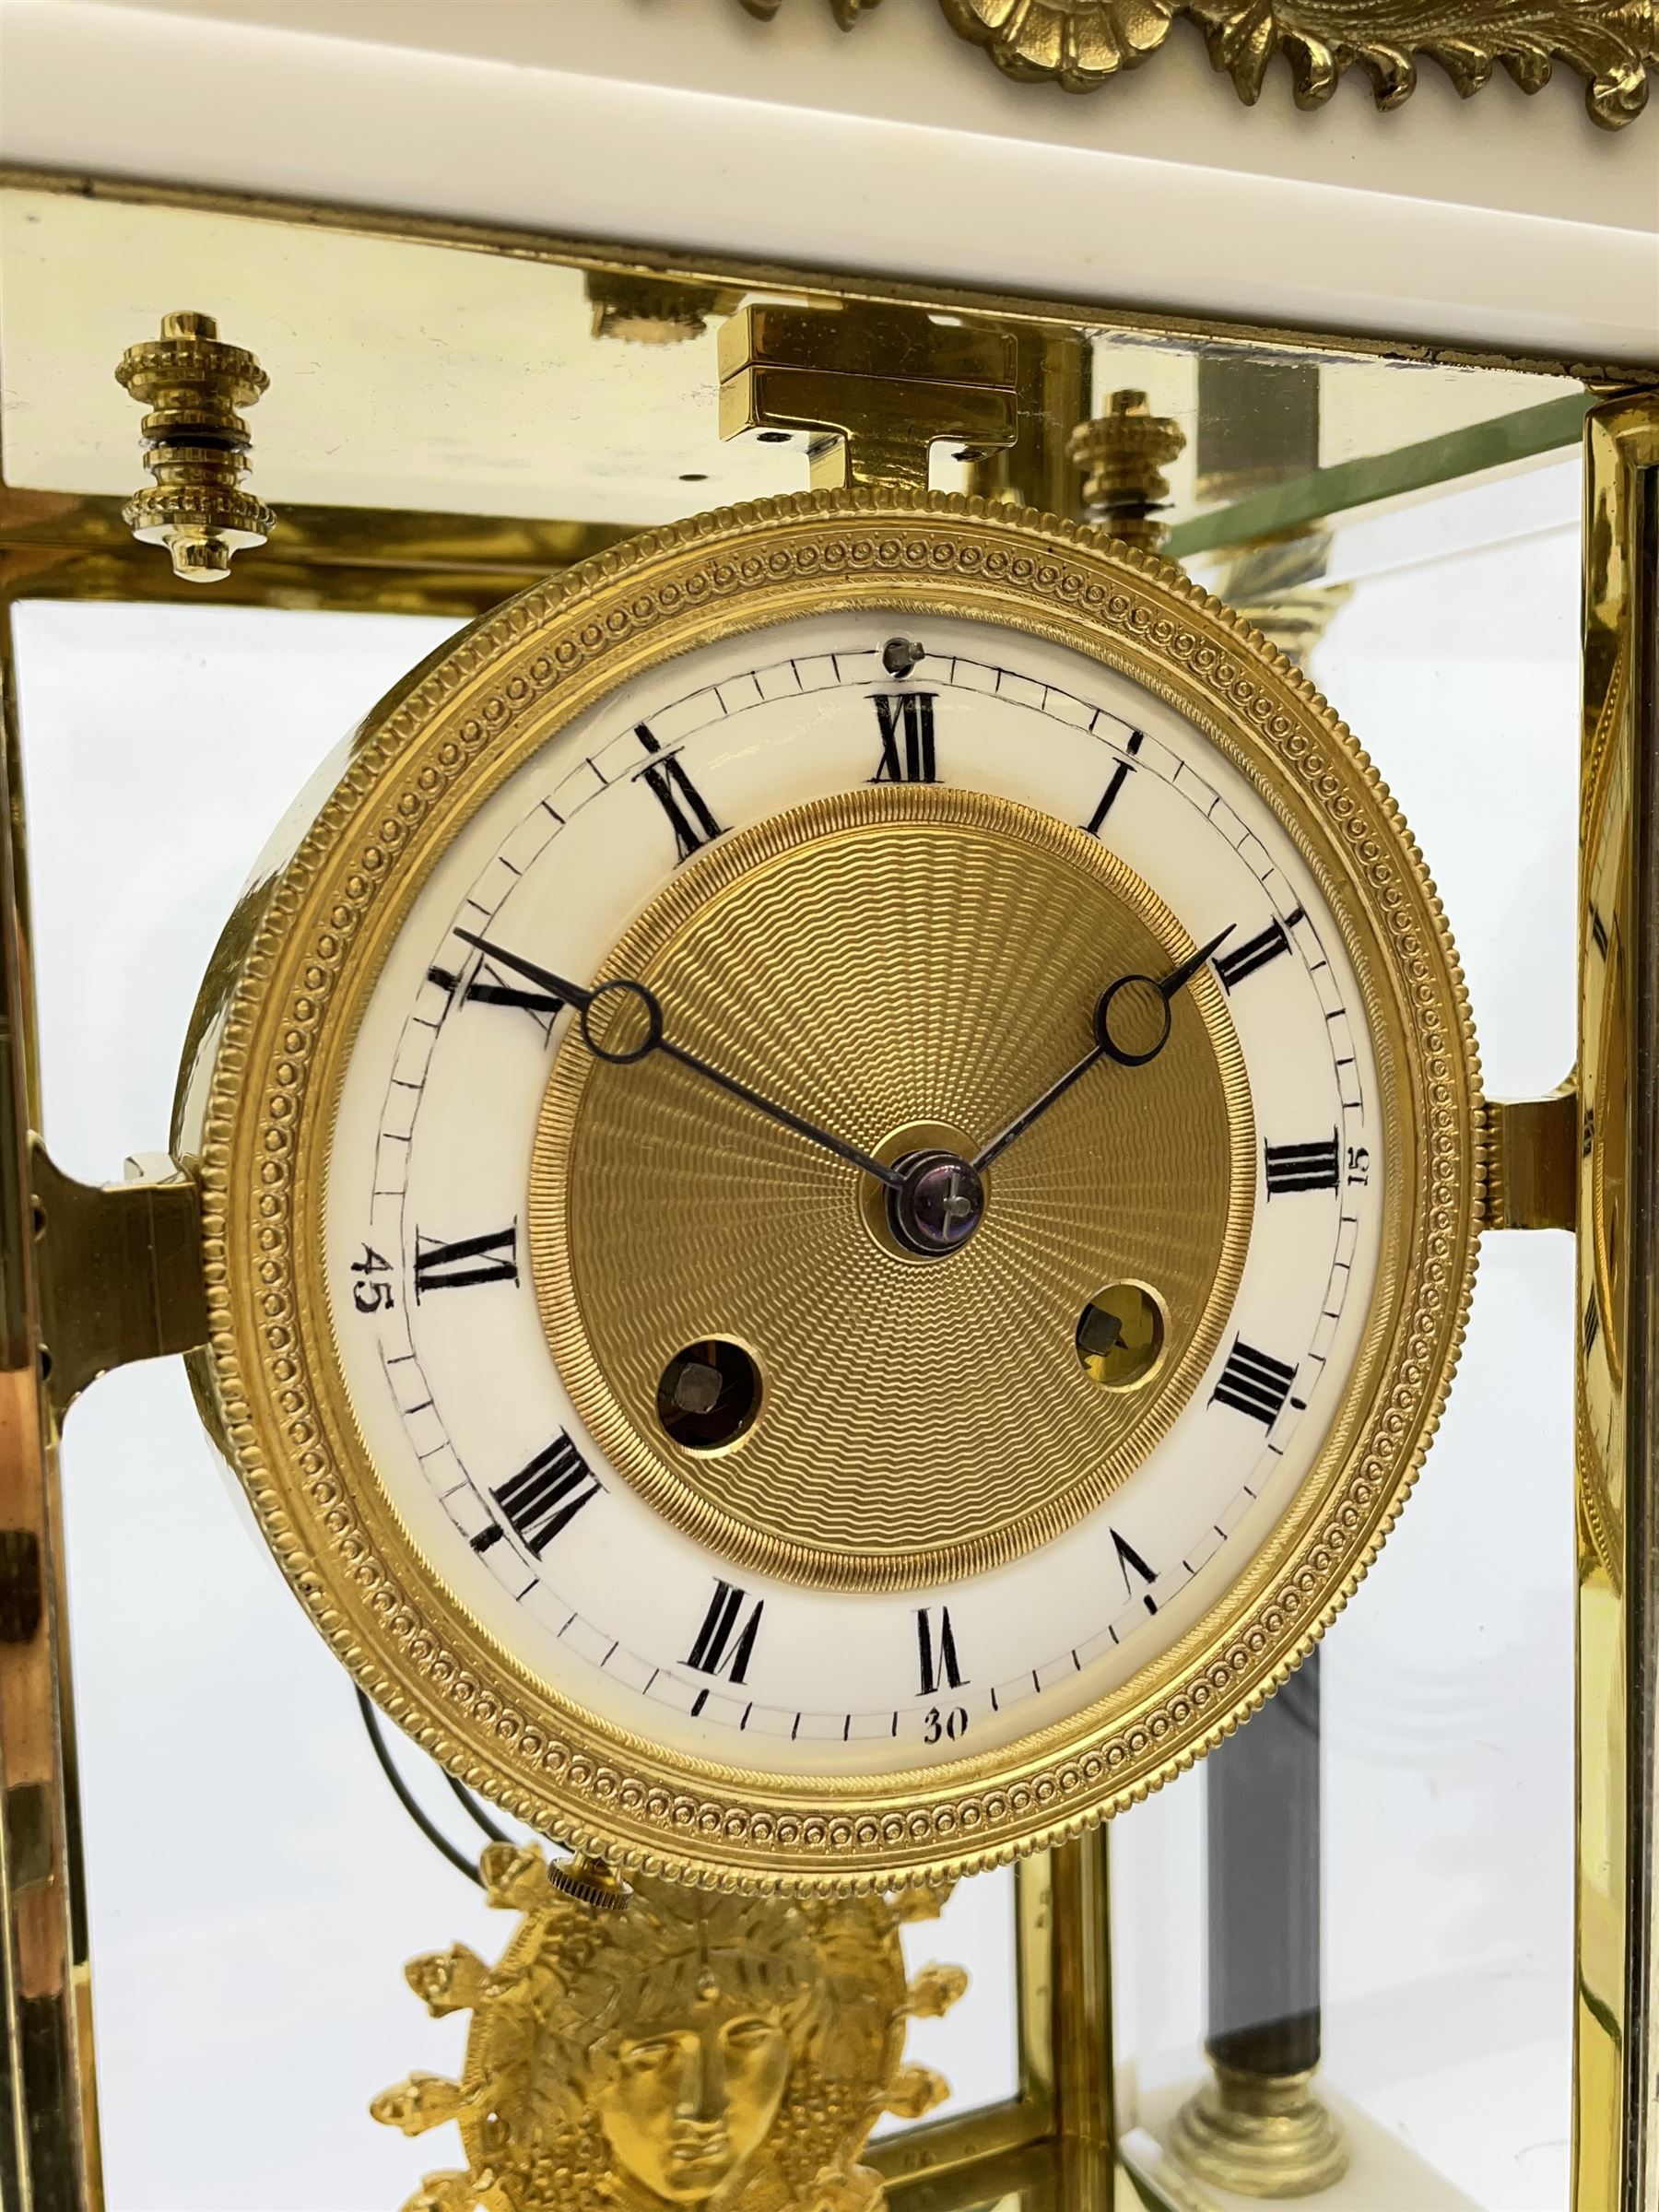 French - Late 19th century 8-day mantel clock in the Empire style - Image 6 of 9